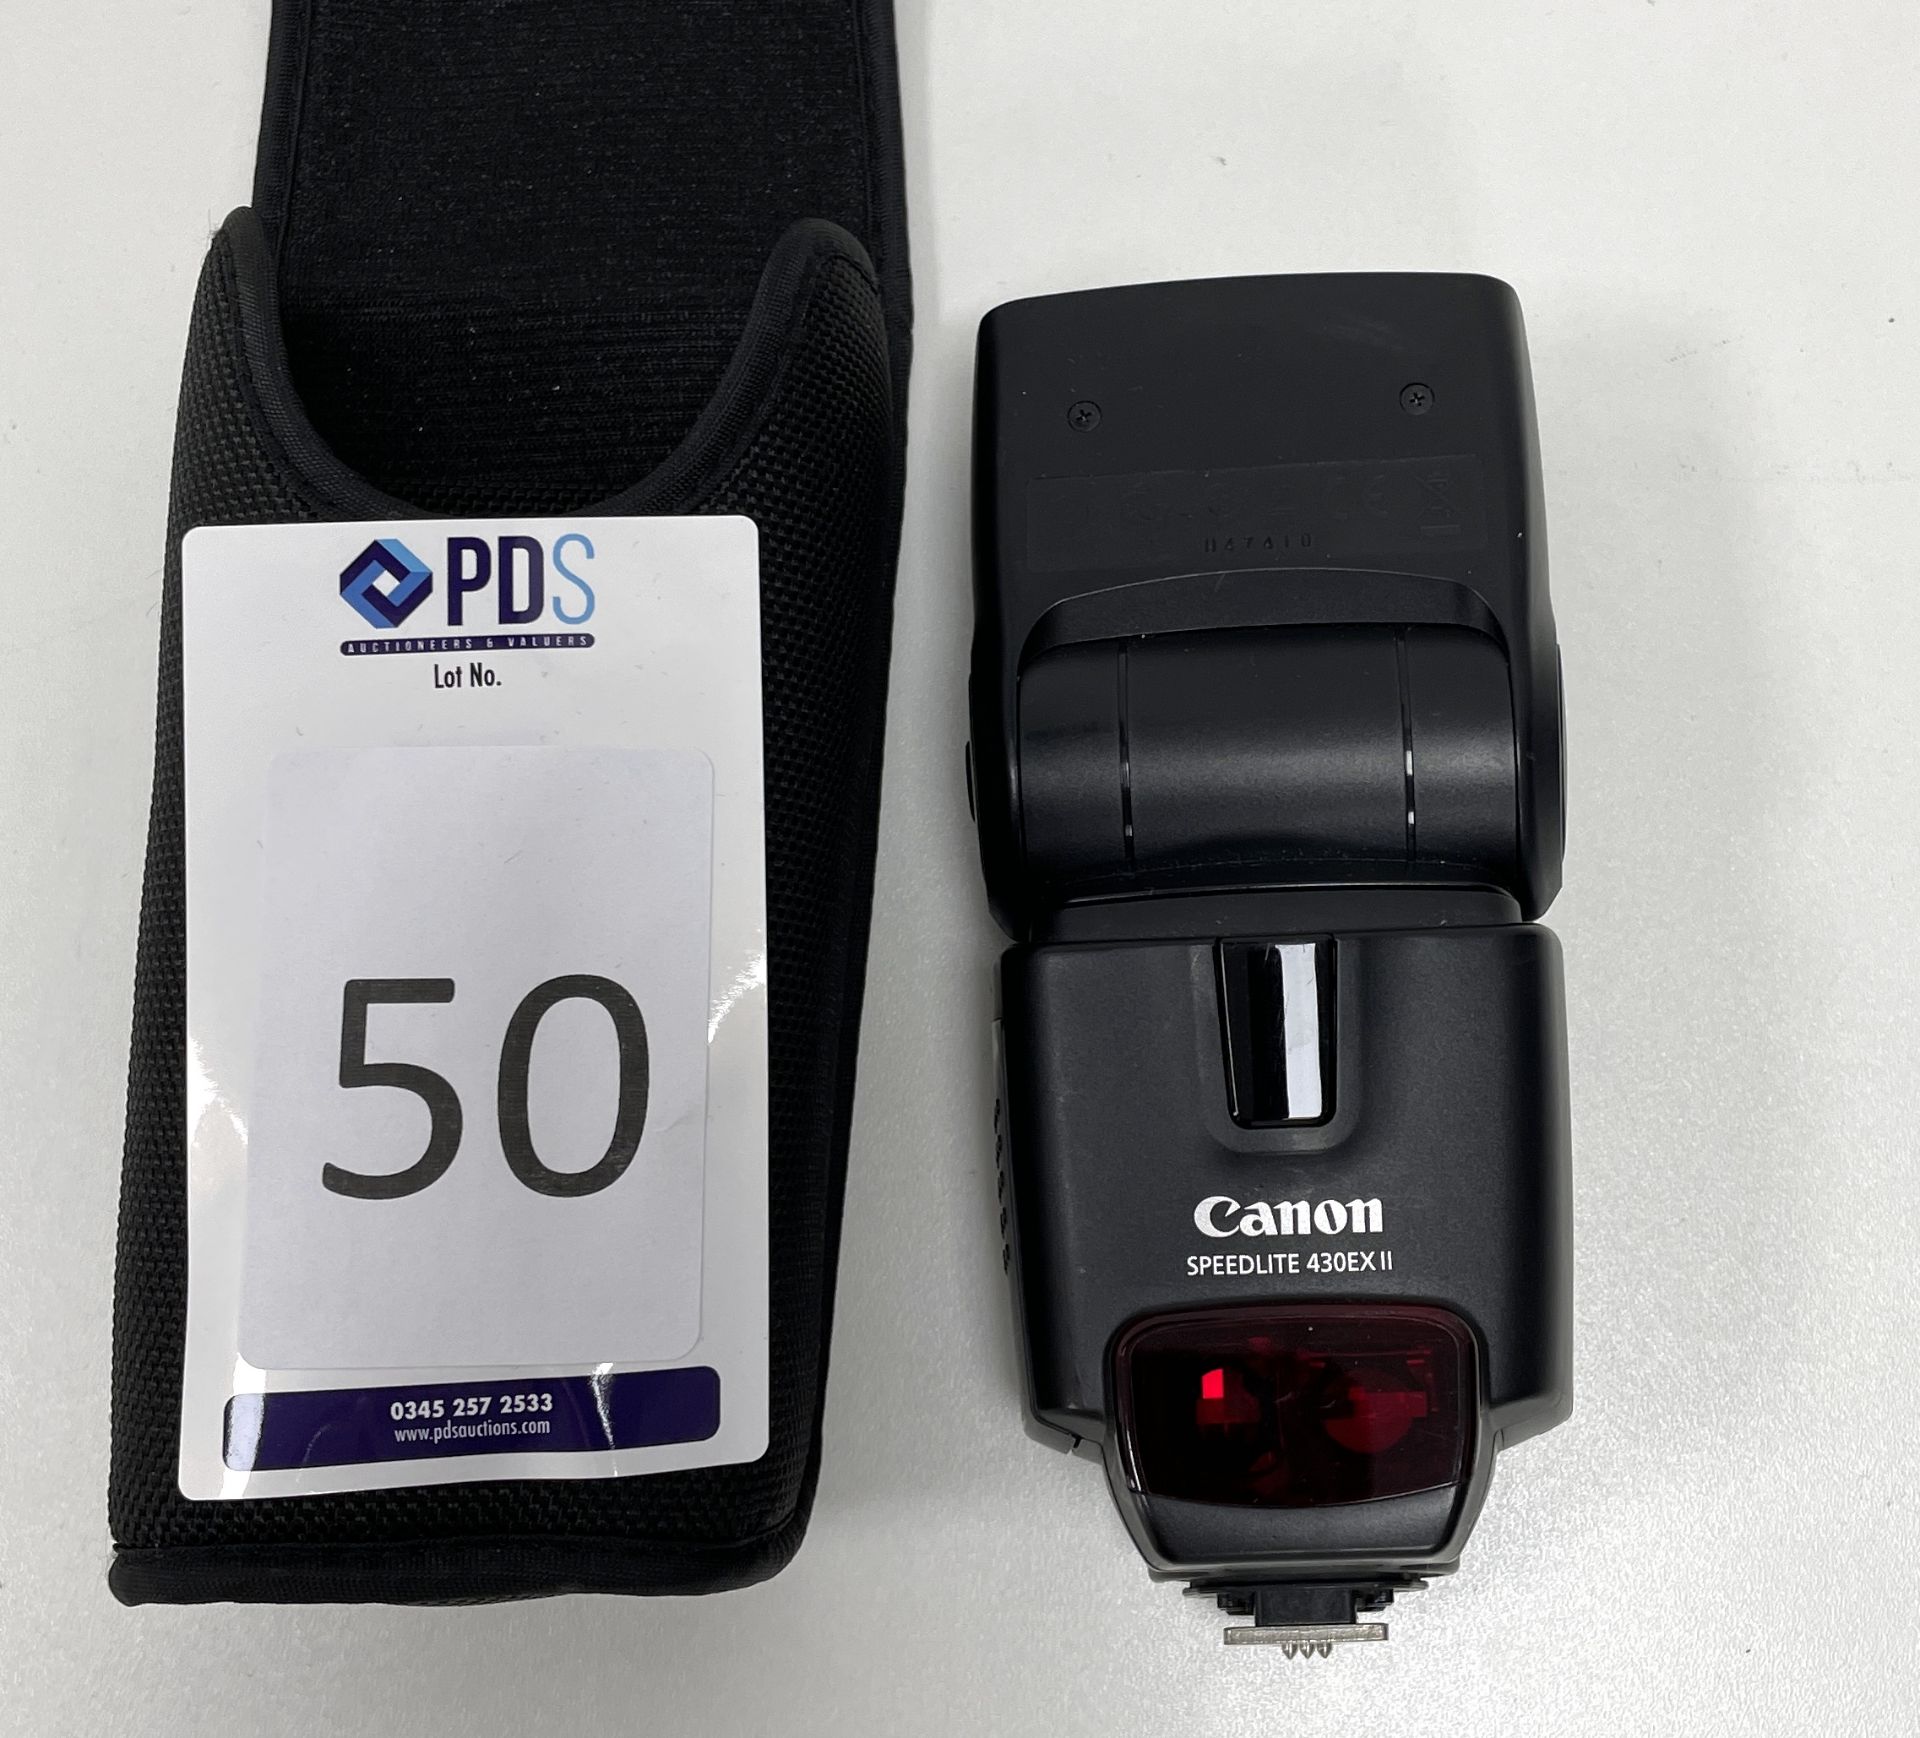 Canon SpeedLite 430EX II Flash Unit (Location: Westminster. Please Refer to General Notes)